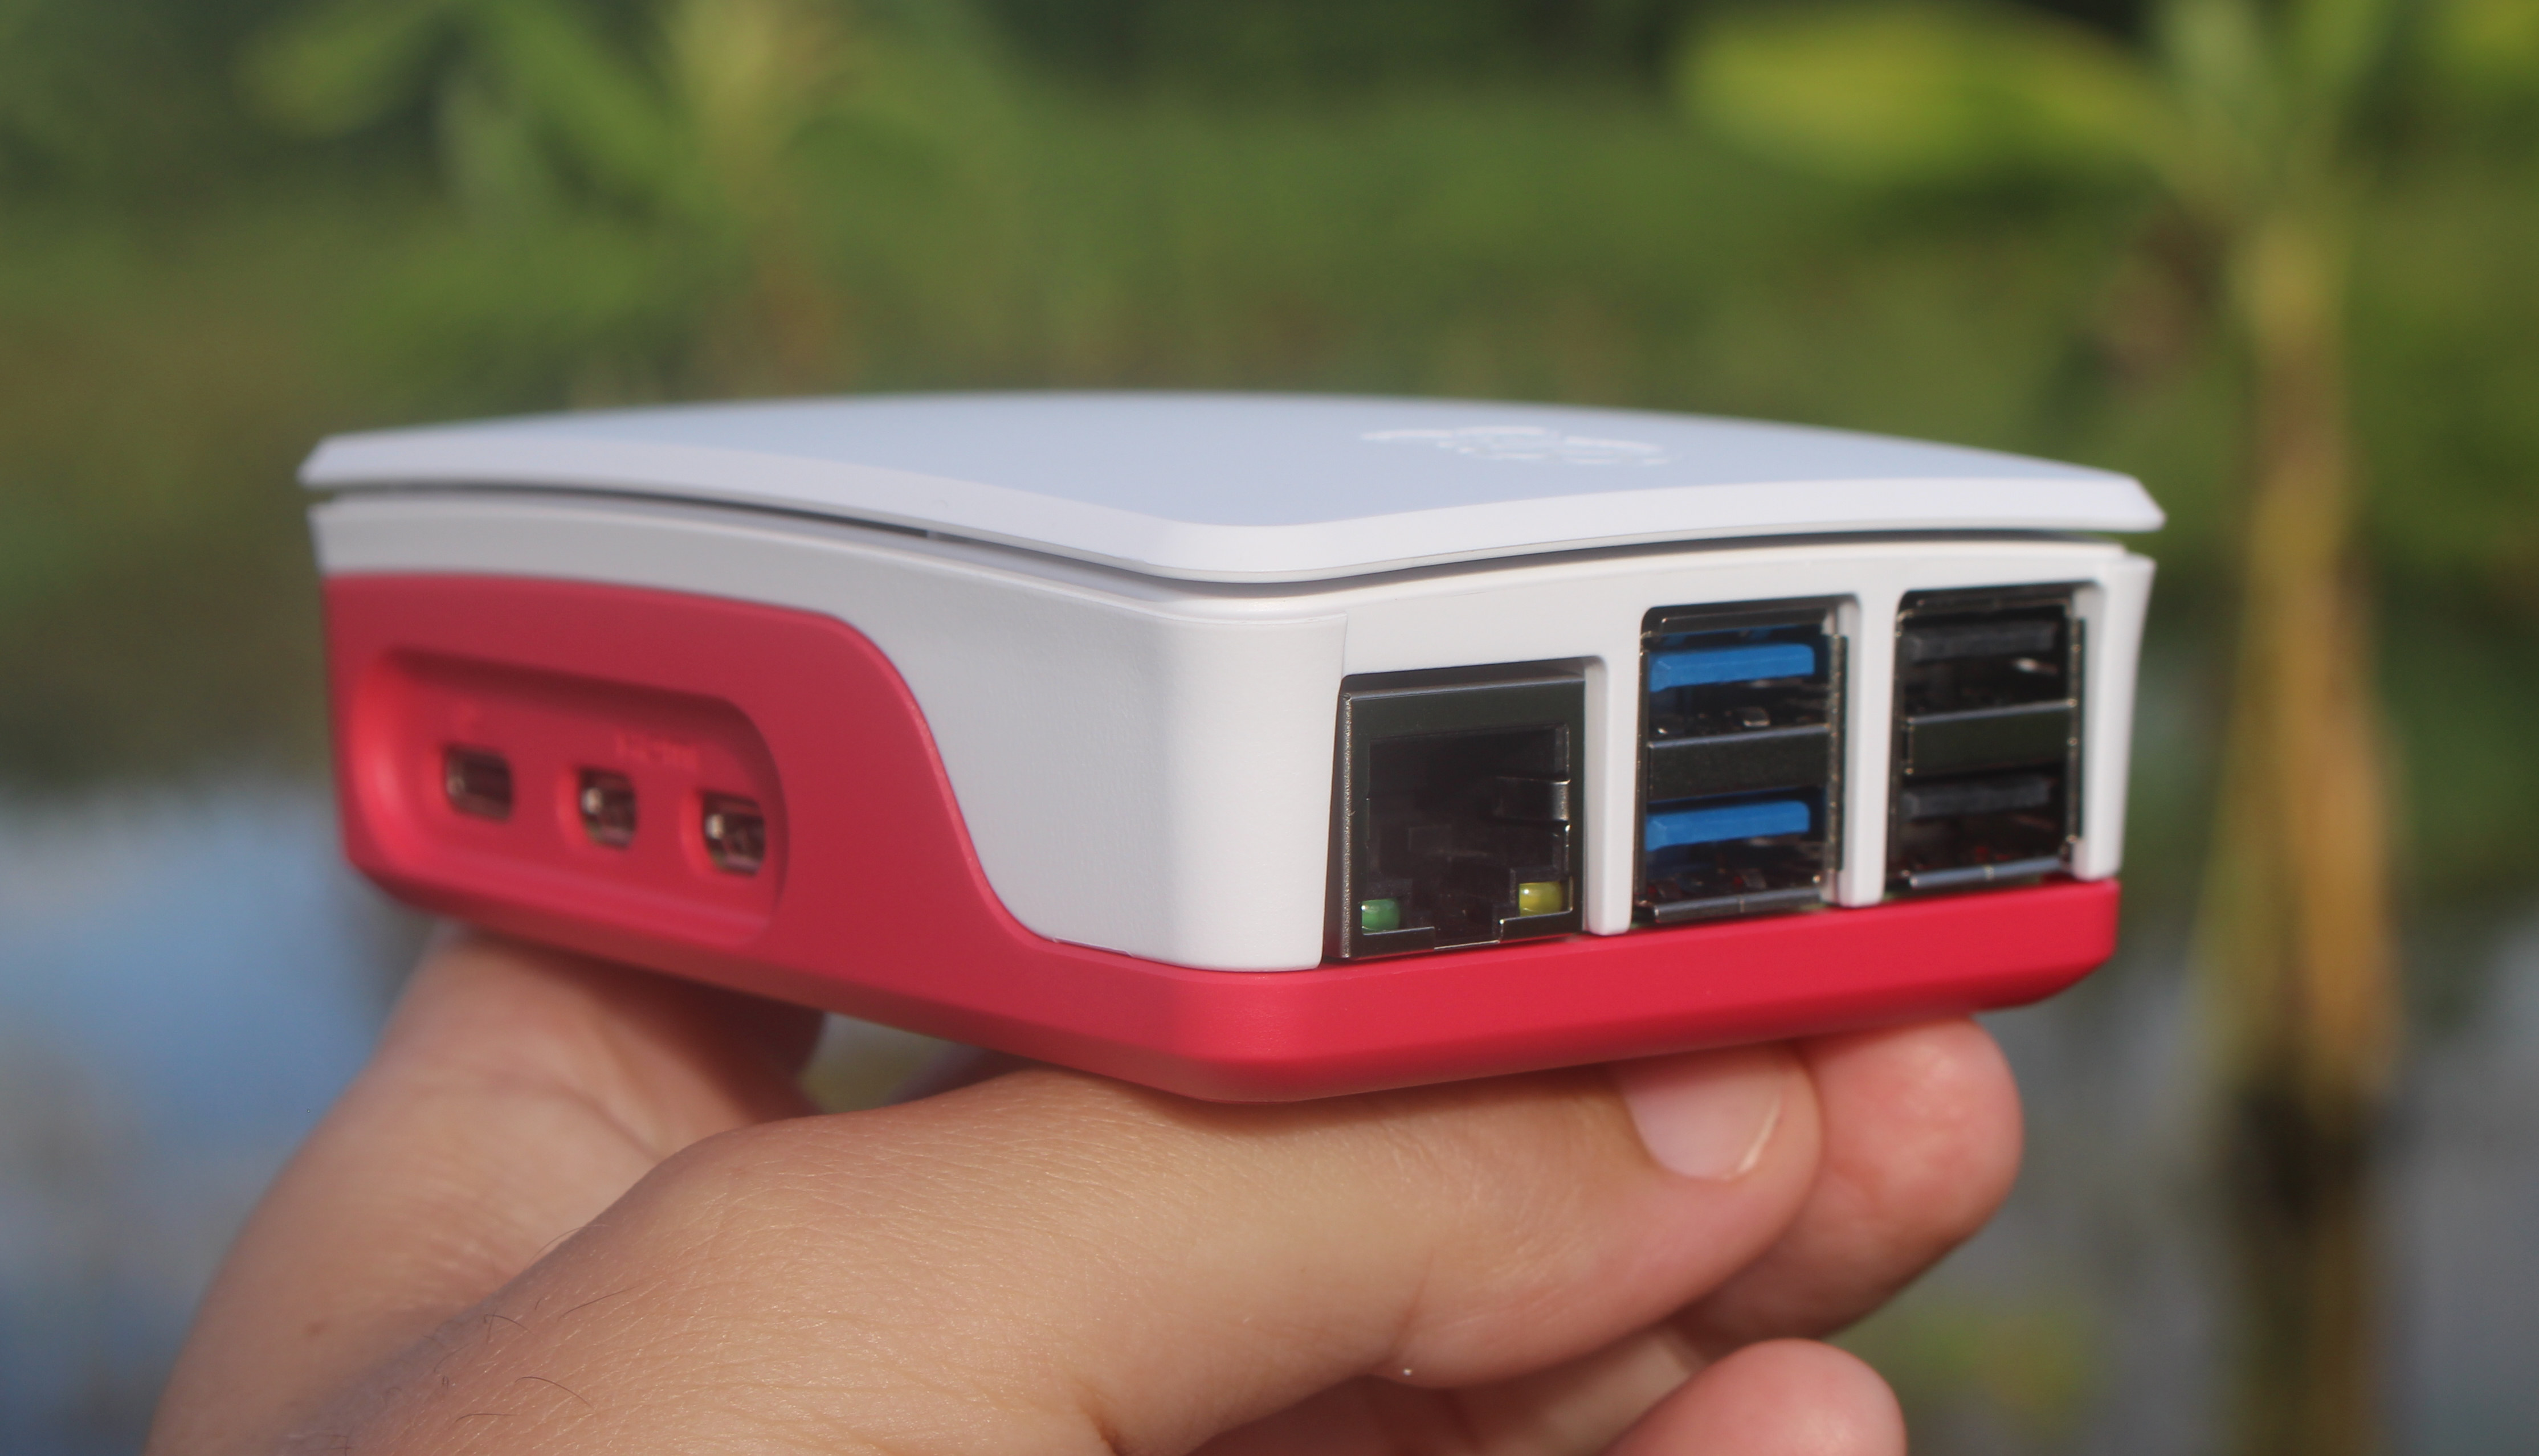 Official Raspberry Pi 5 Case - Red & White